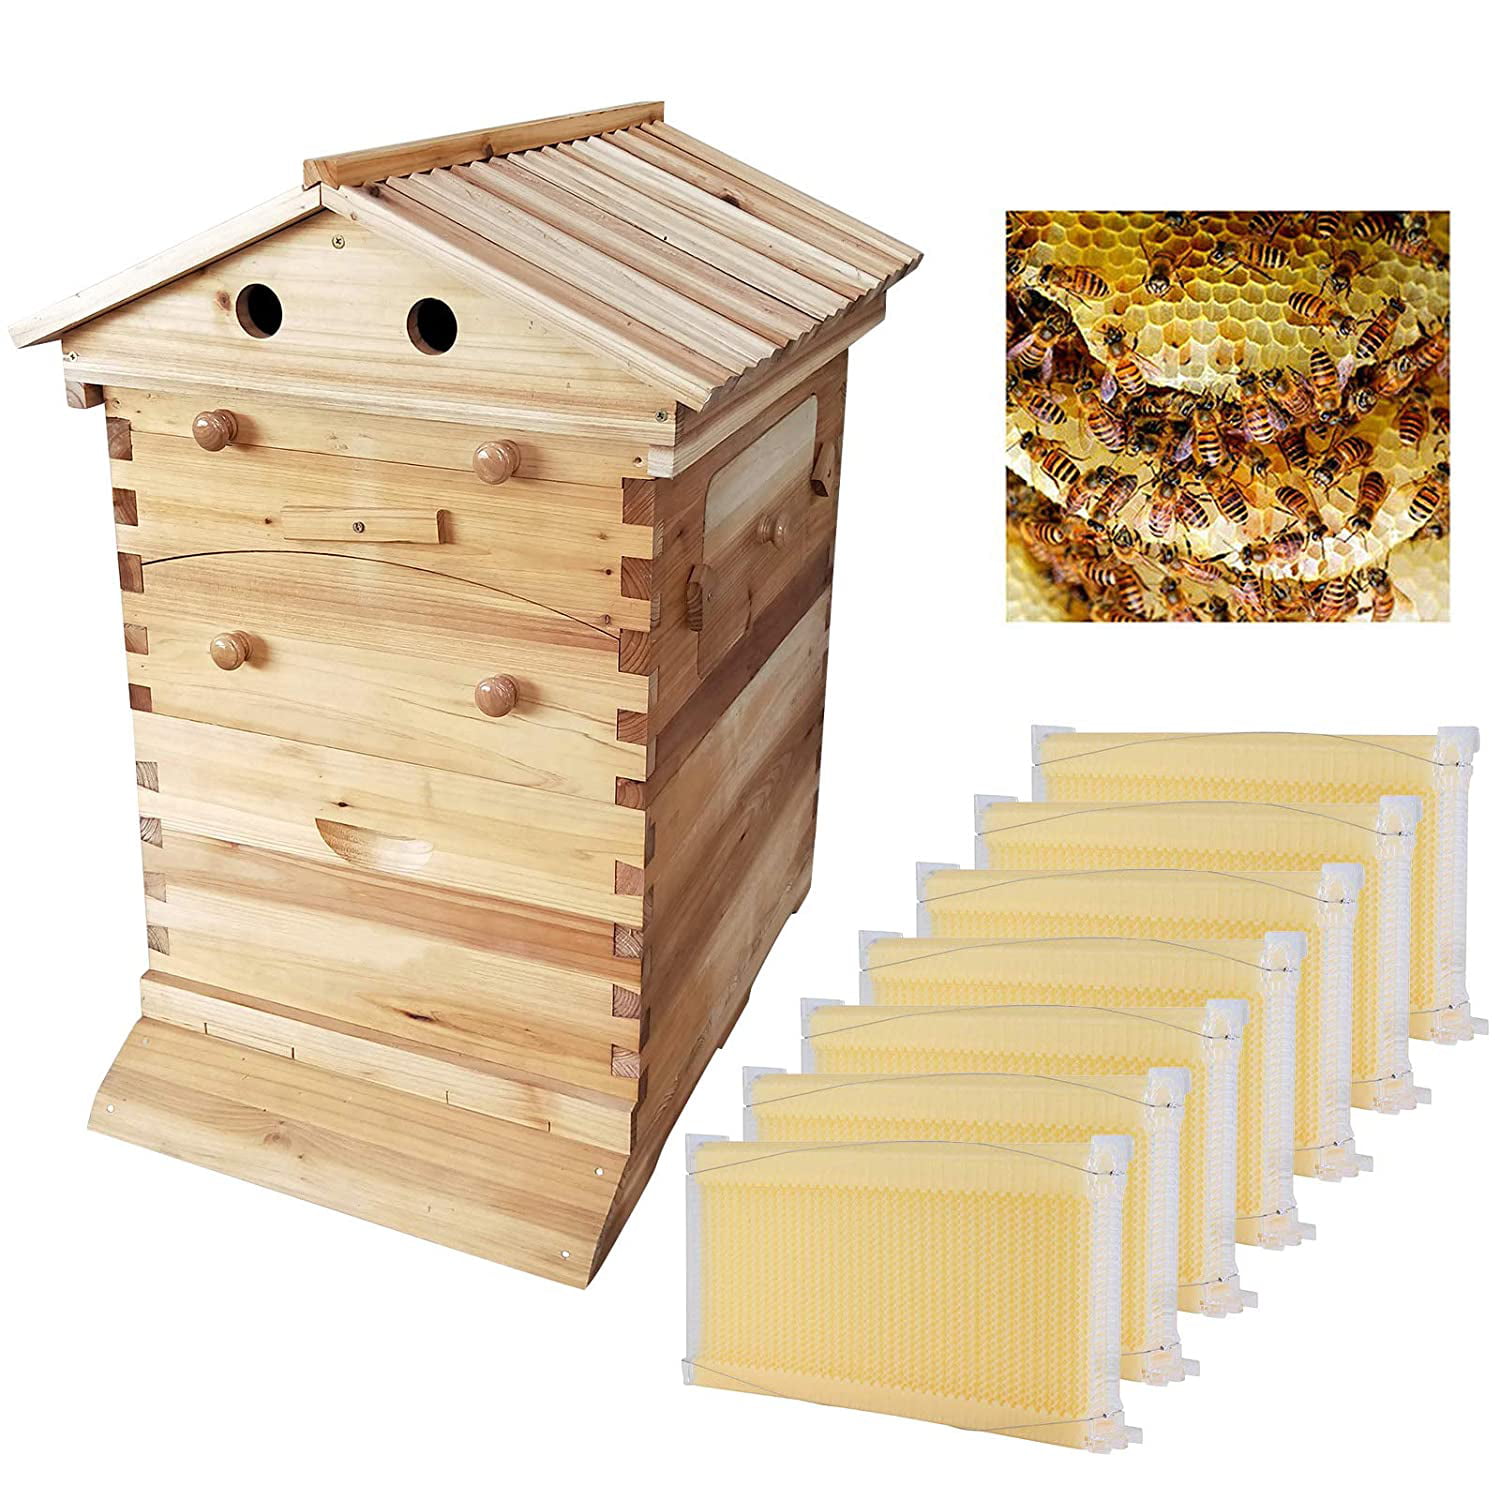 Details about   7PCS Auto Run Bee Comb Hive Practical Wooden Beekeeping Beehive House Box NEW 